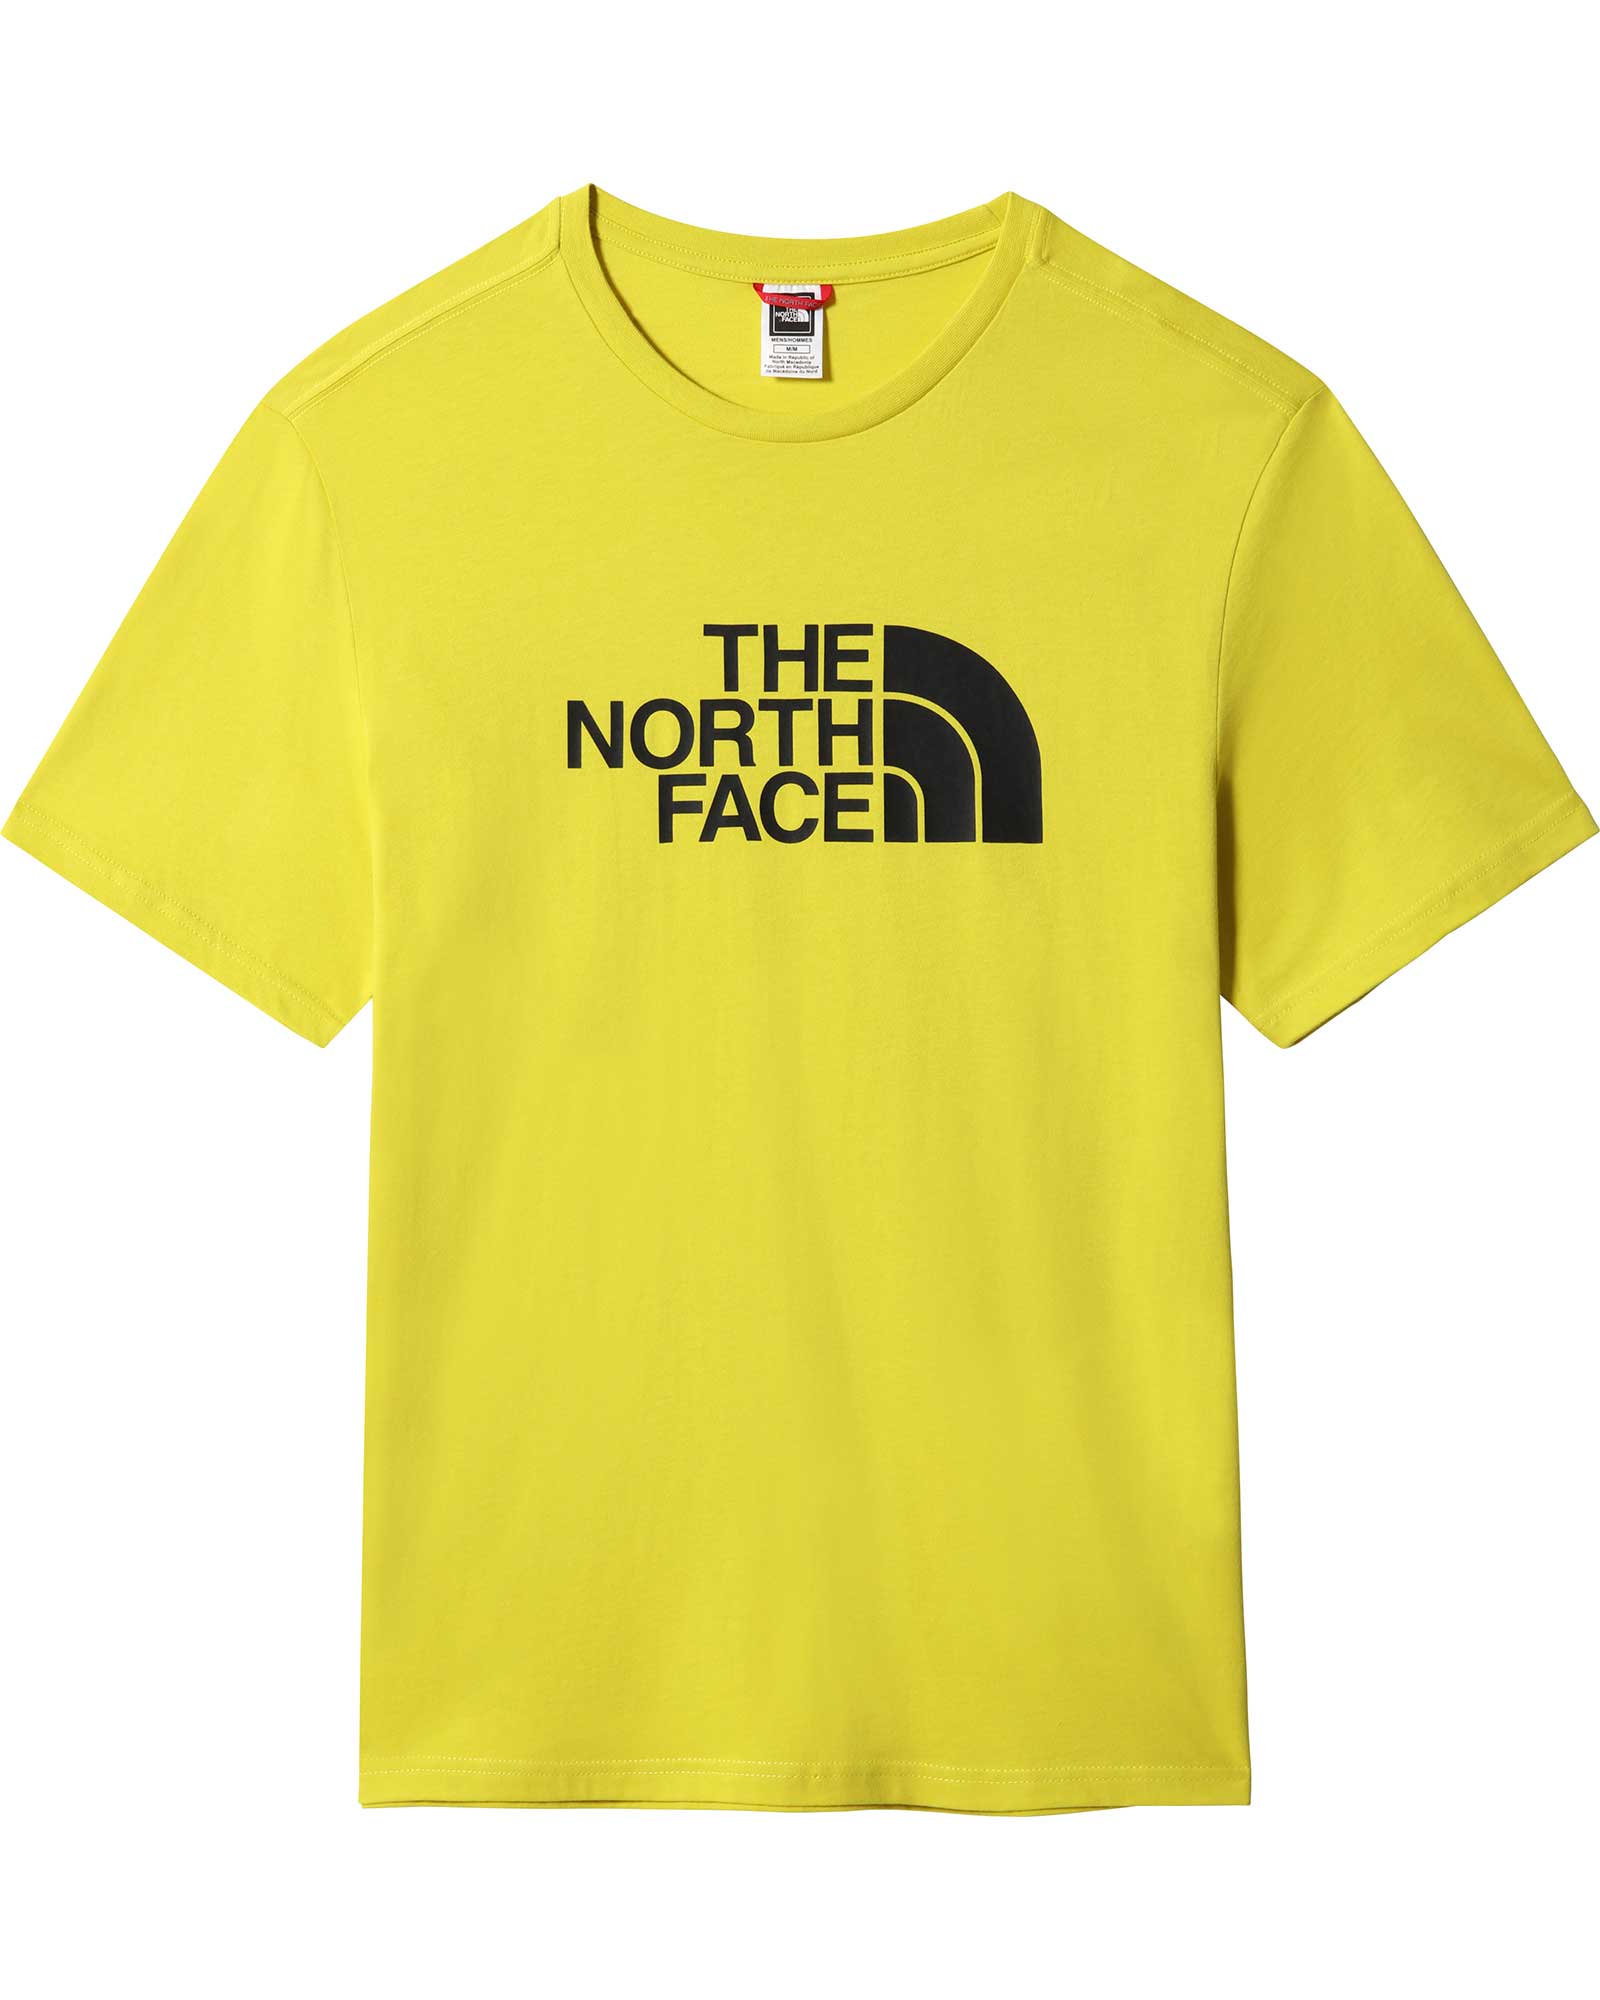 The North Face Easy Men’s T Shirt - Acid Yellow M